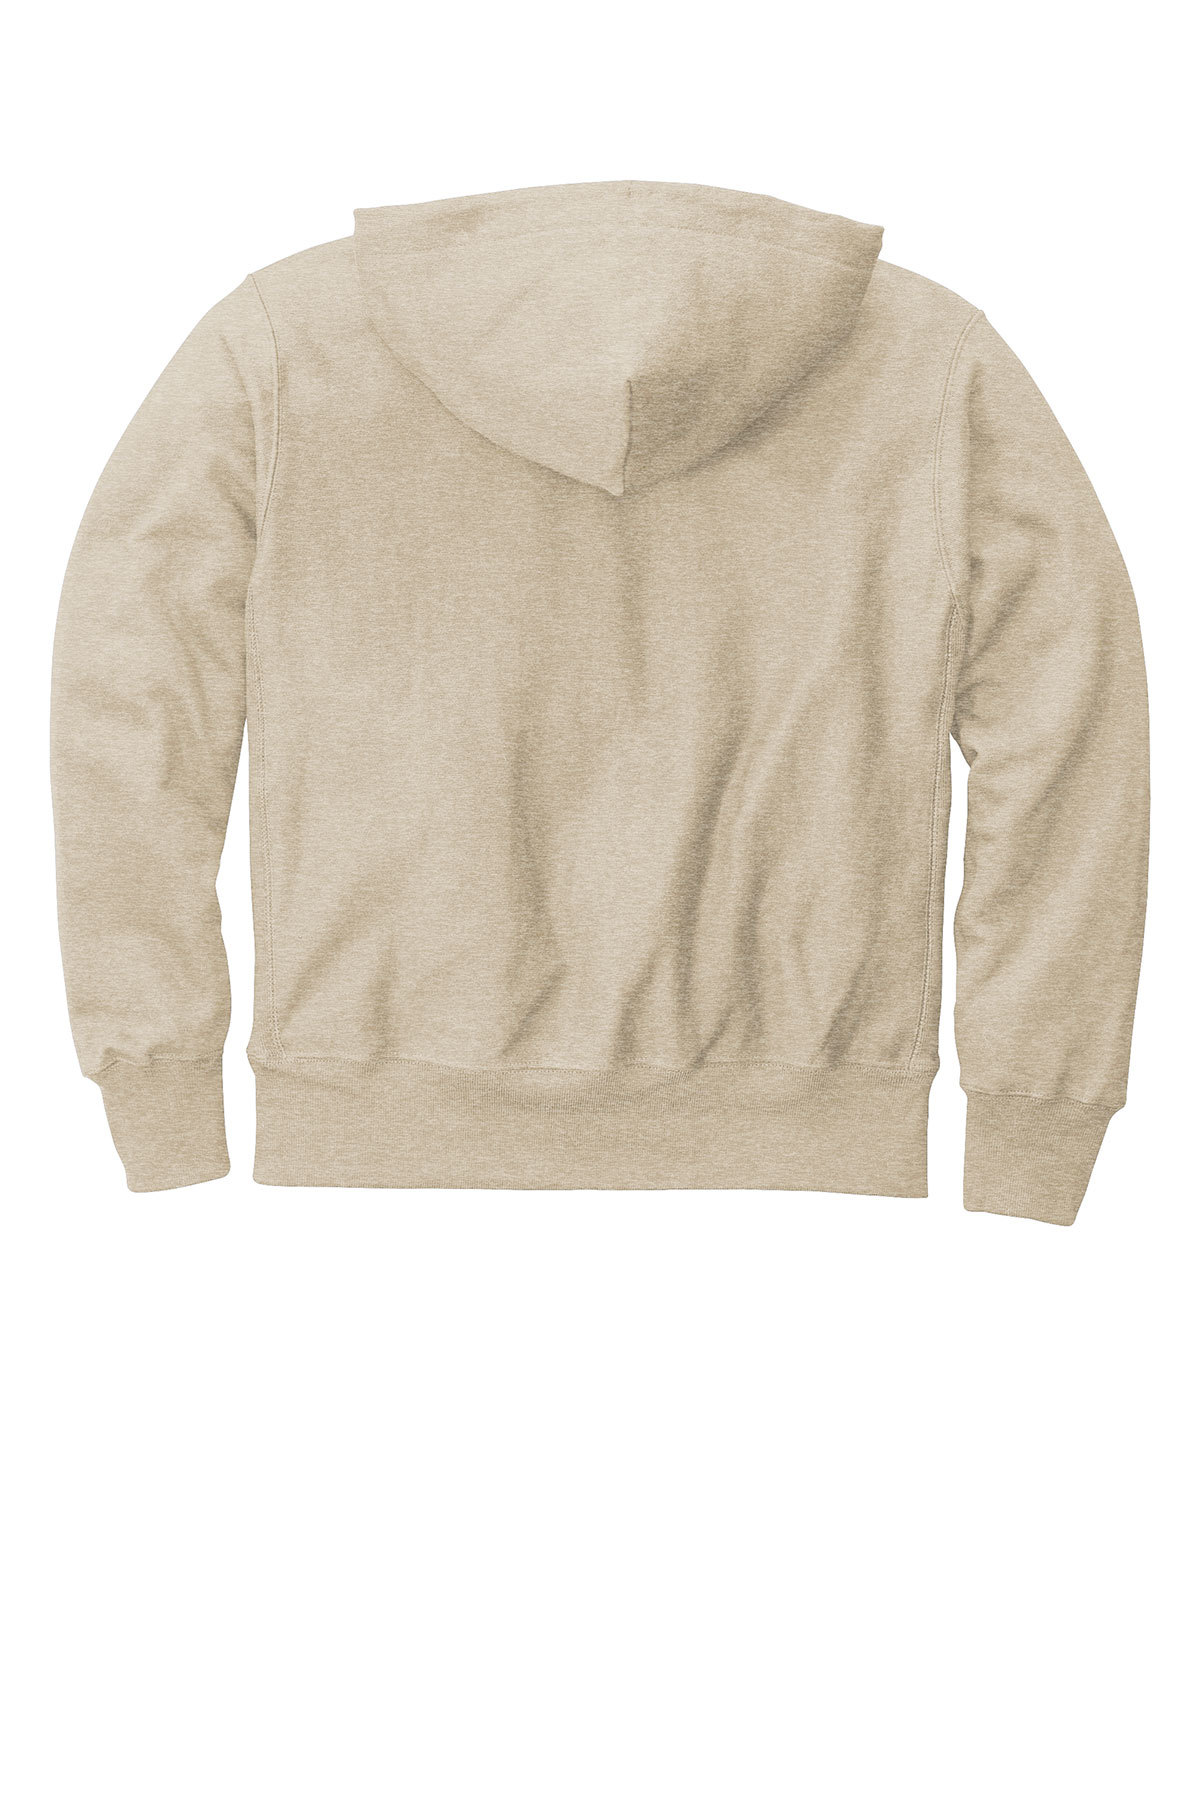 Champion Reverse Weave Hooded Sweatshirt | Product | Company Casuals